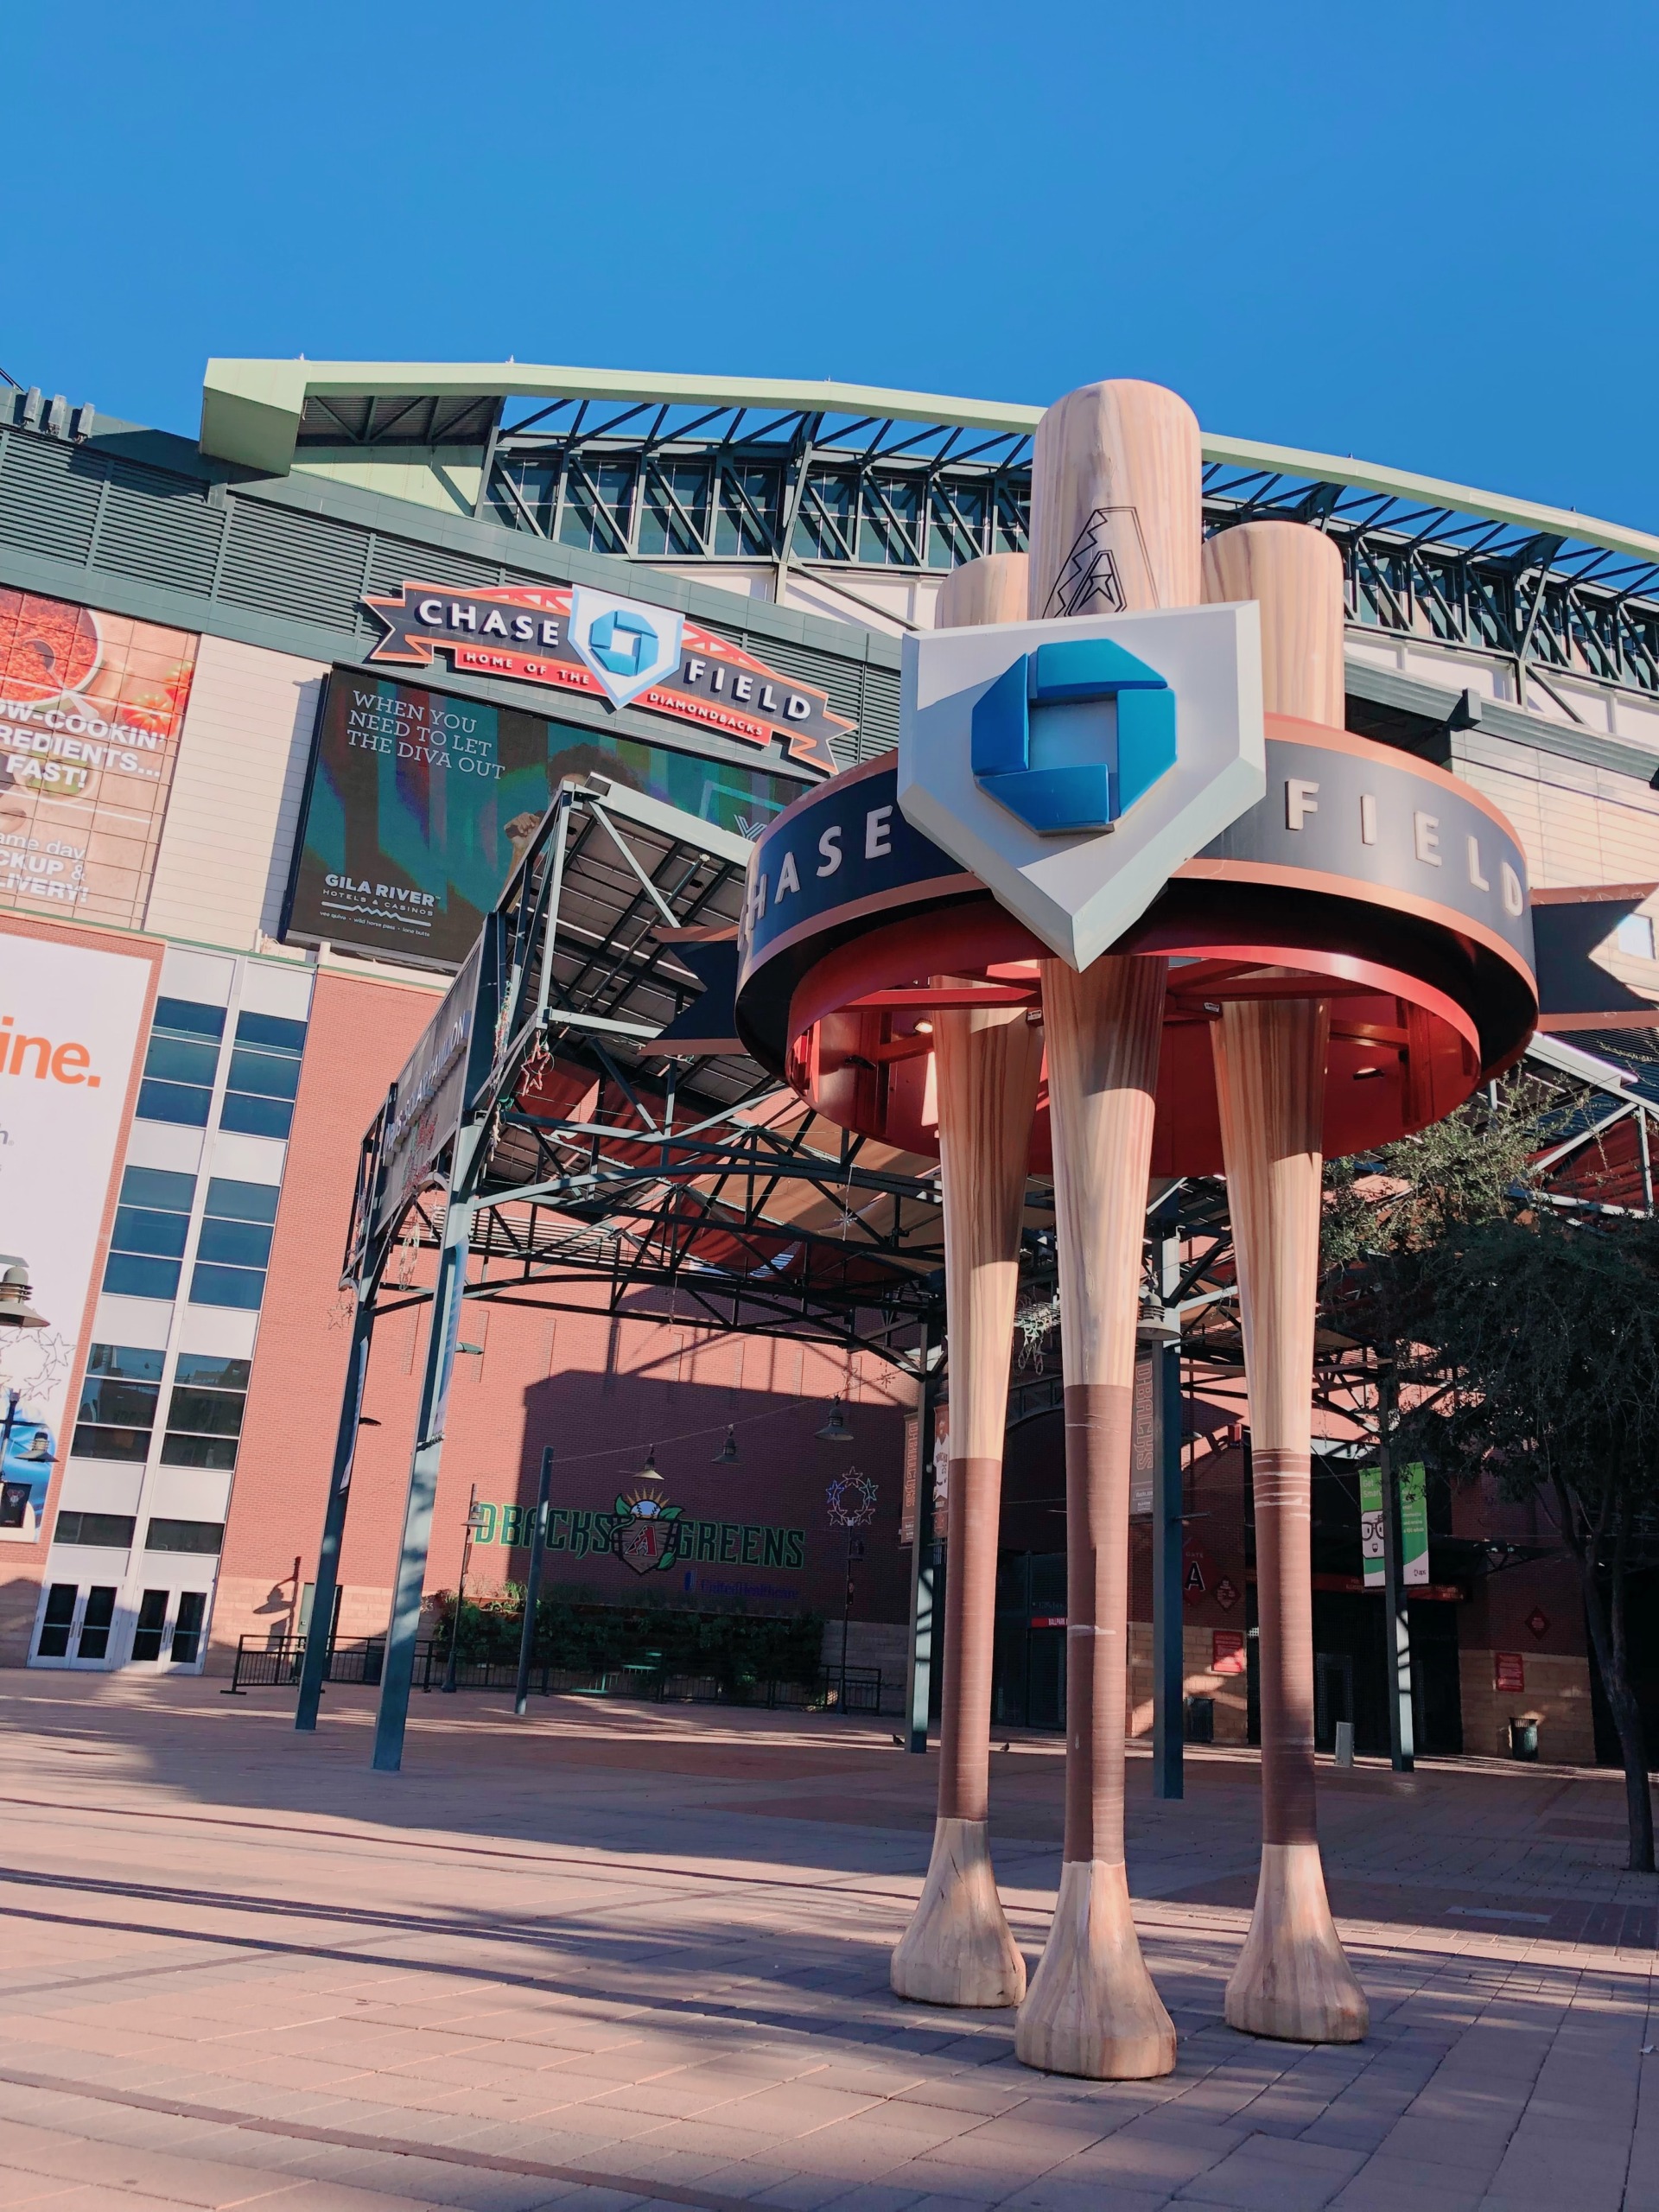 Where to Find Parking, Food, and Fun at Chase Field